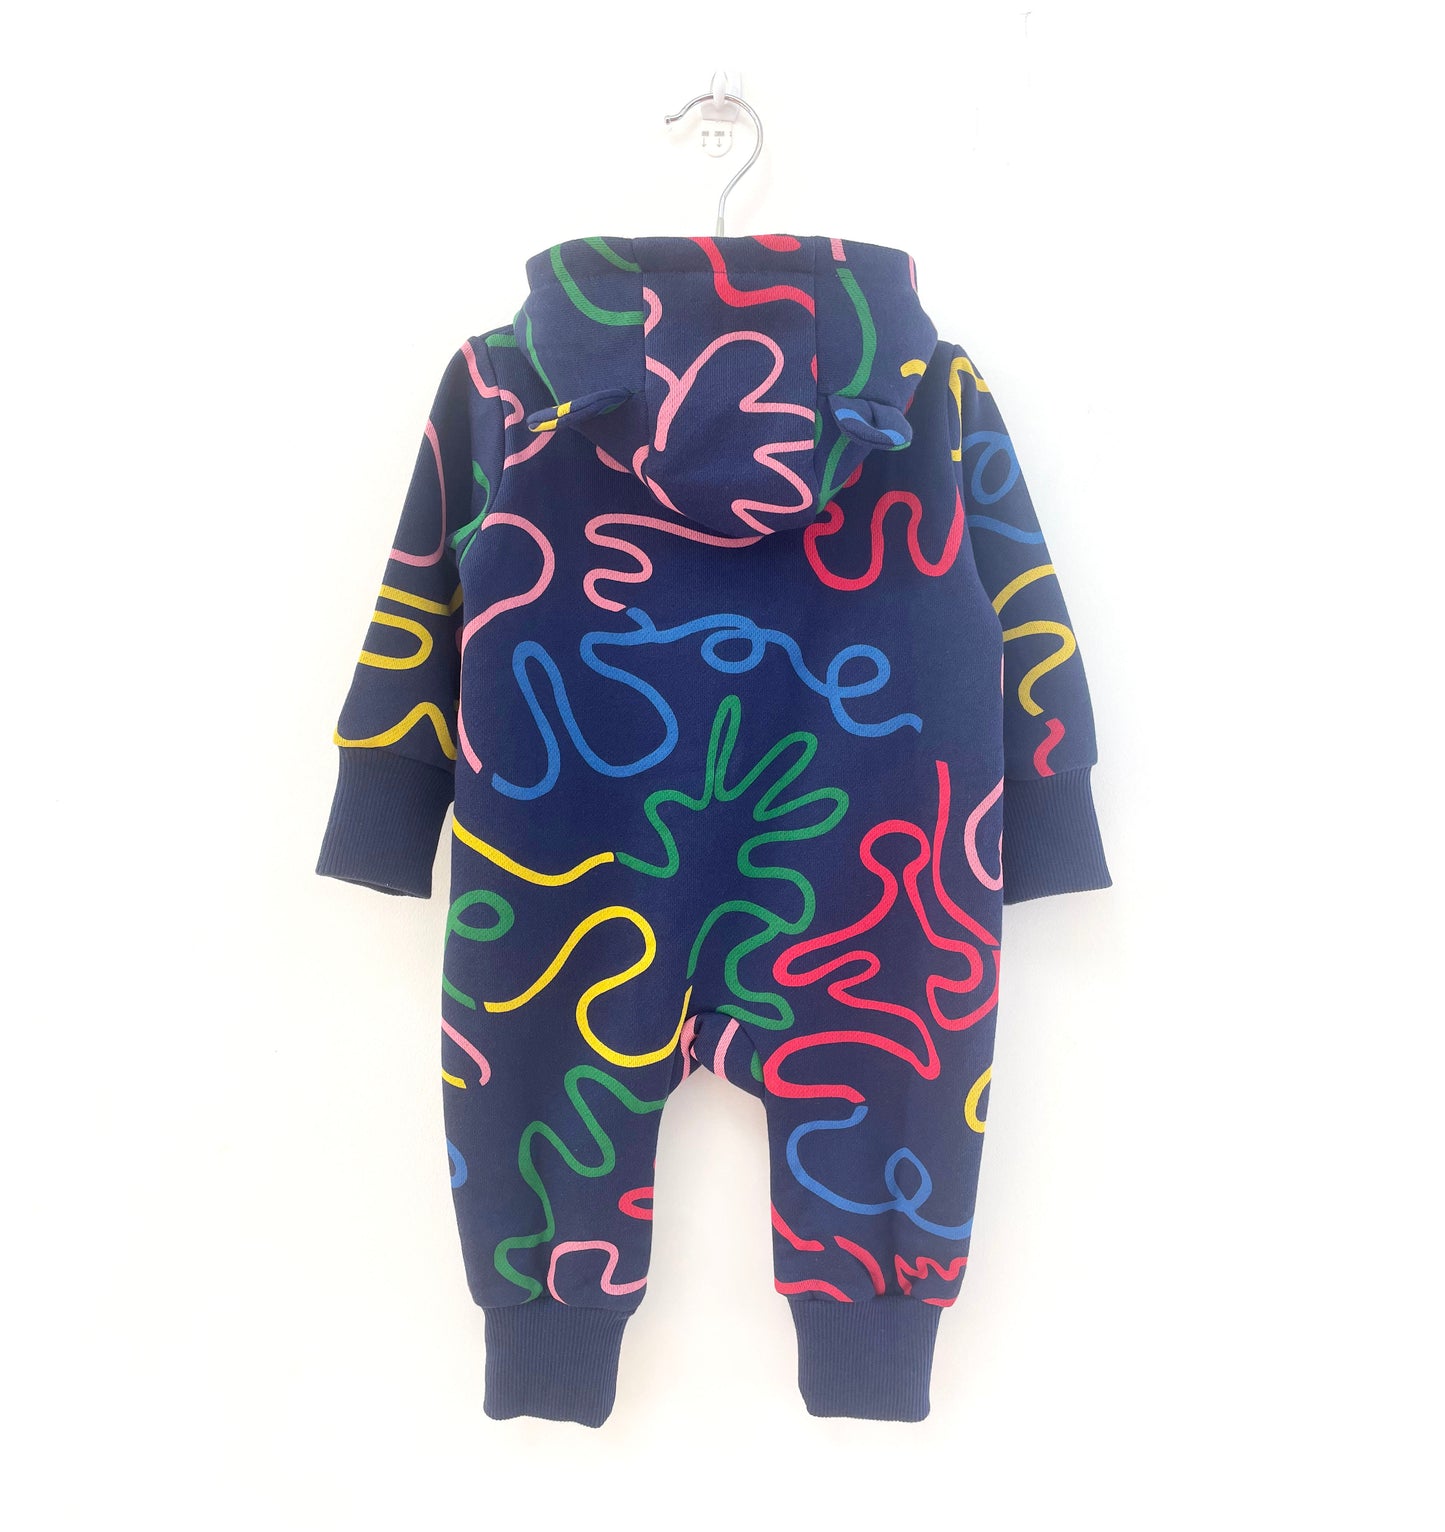 Baby Squiggle all-in-one